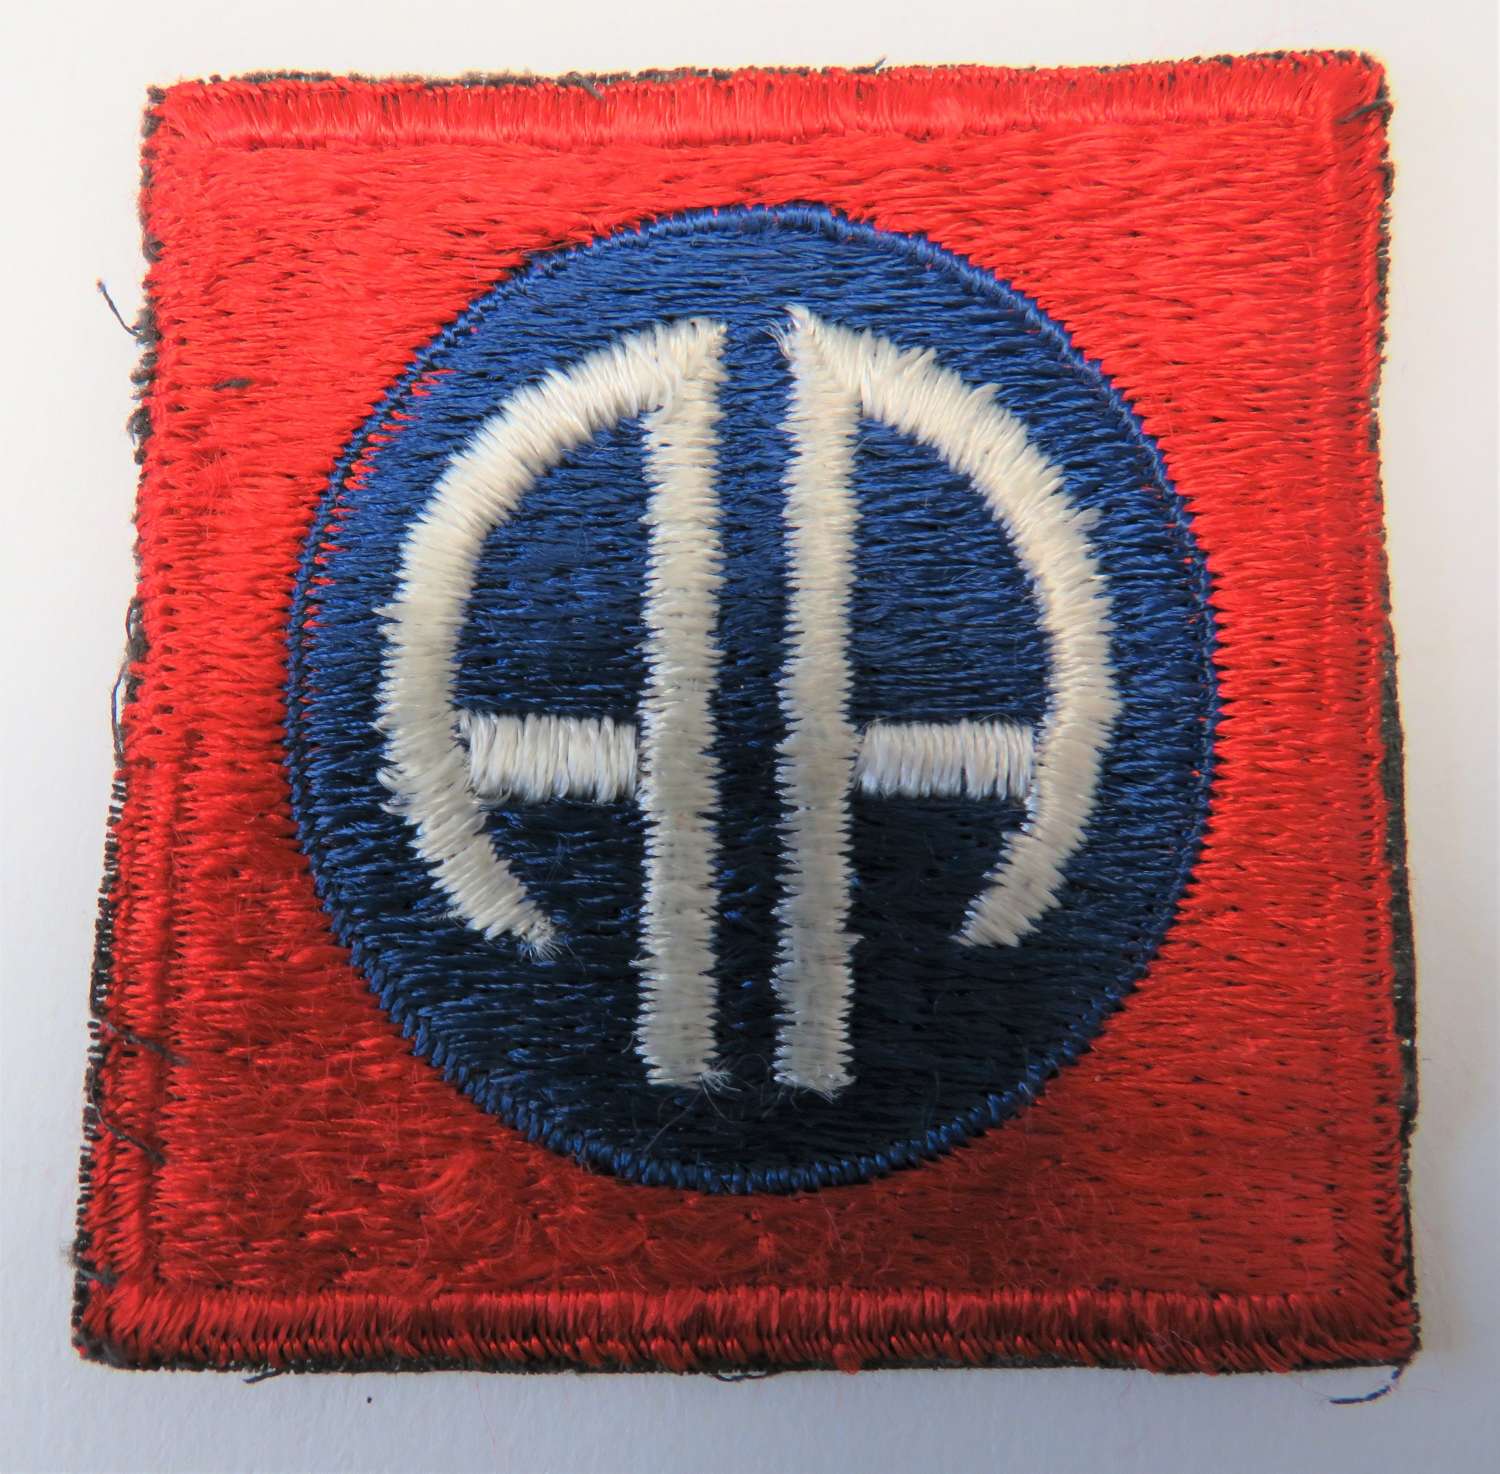 American 82nd Airborne Formation Badge